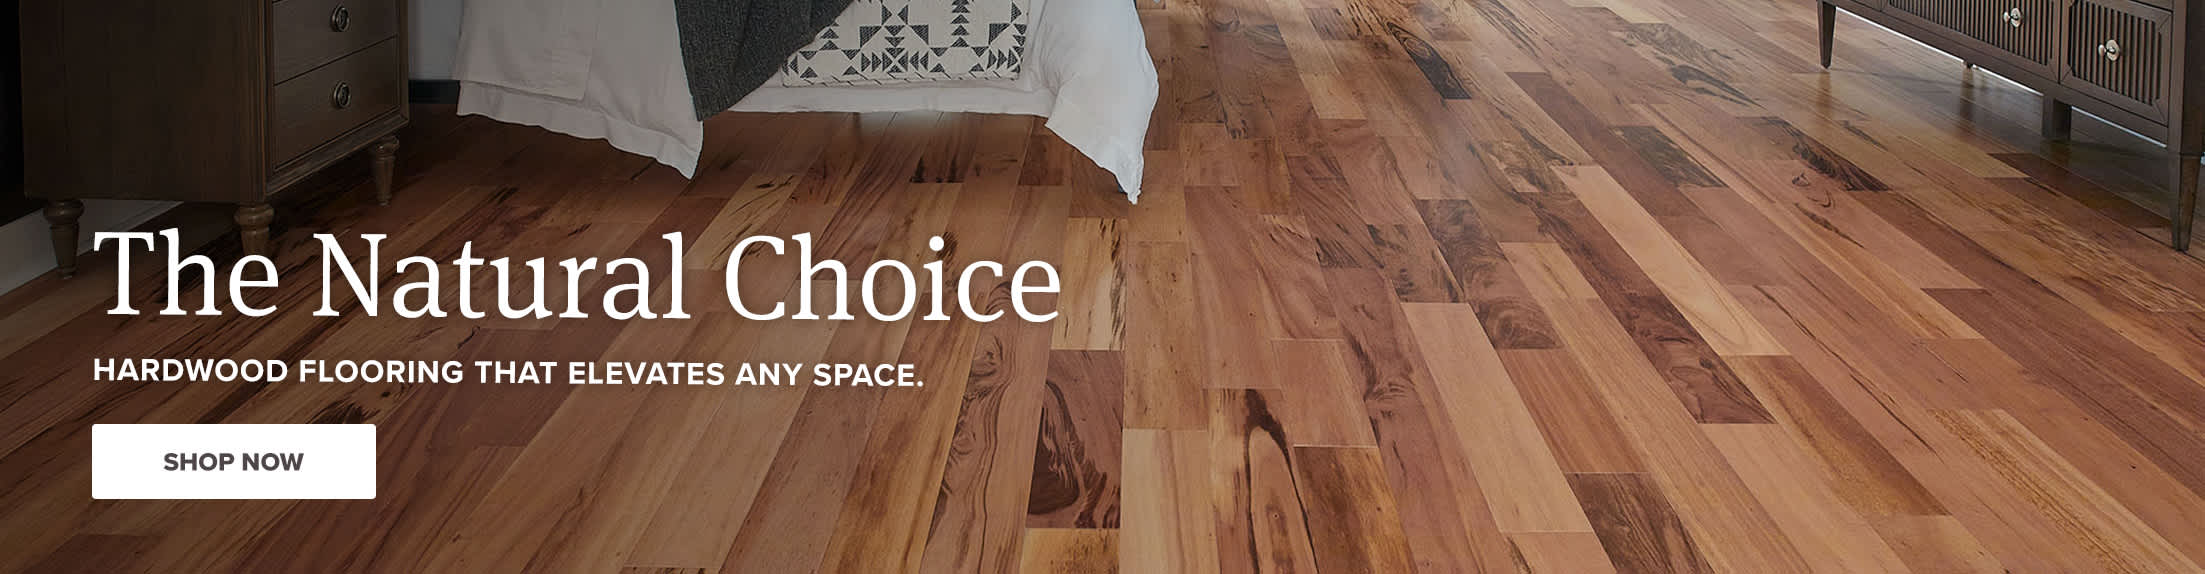 the natural choice hardwood flooring that elevates any space. shop now